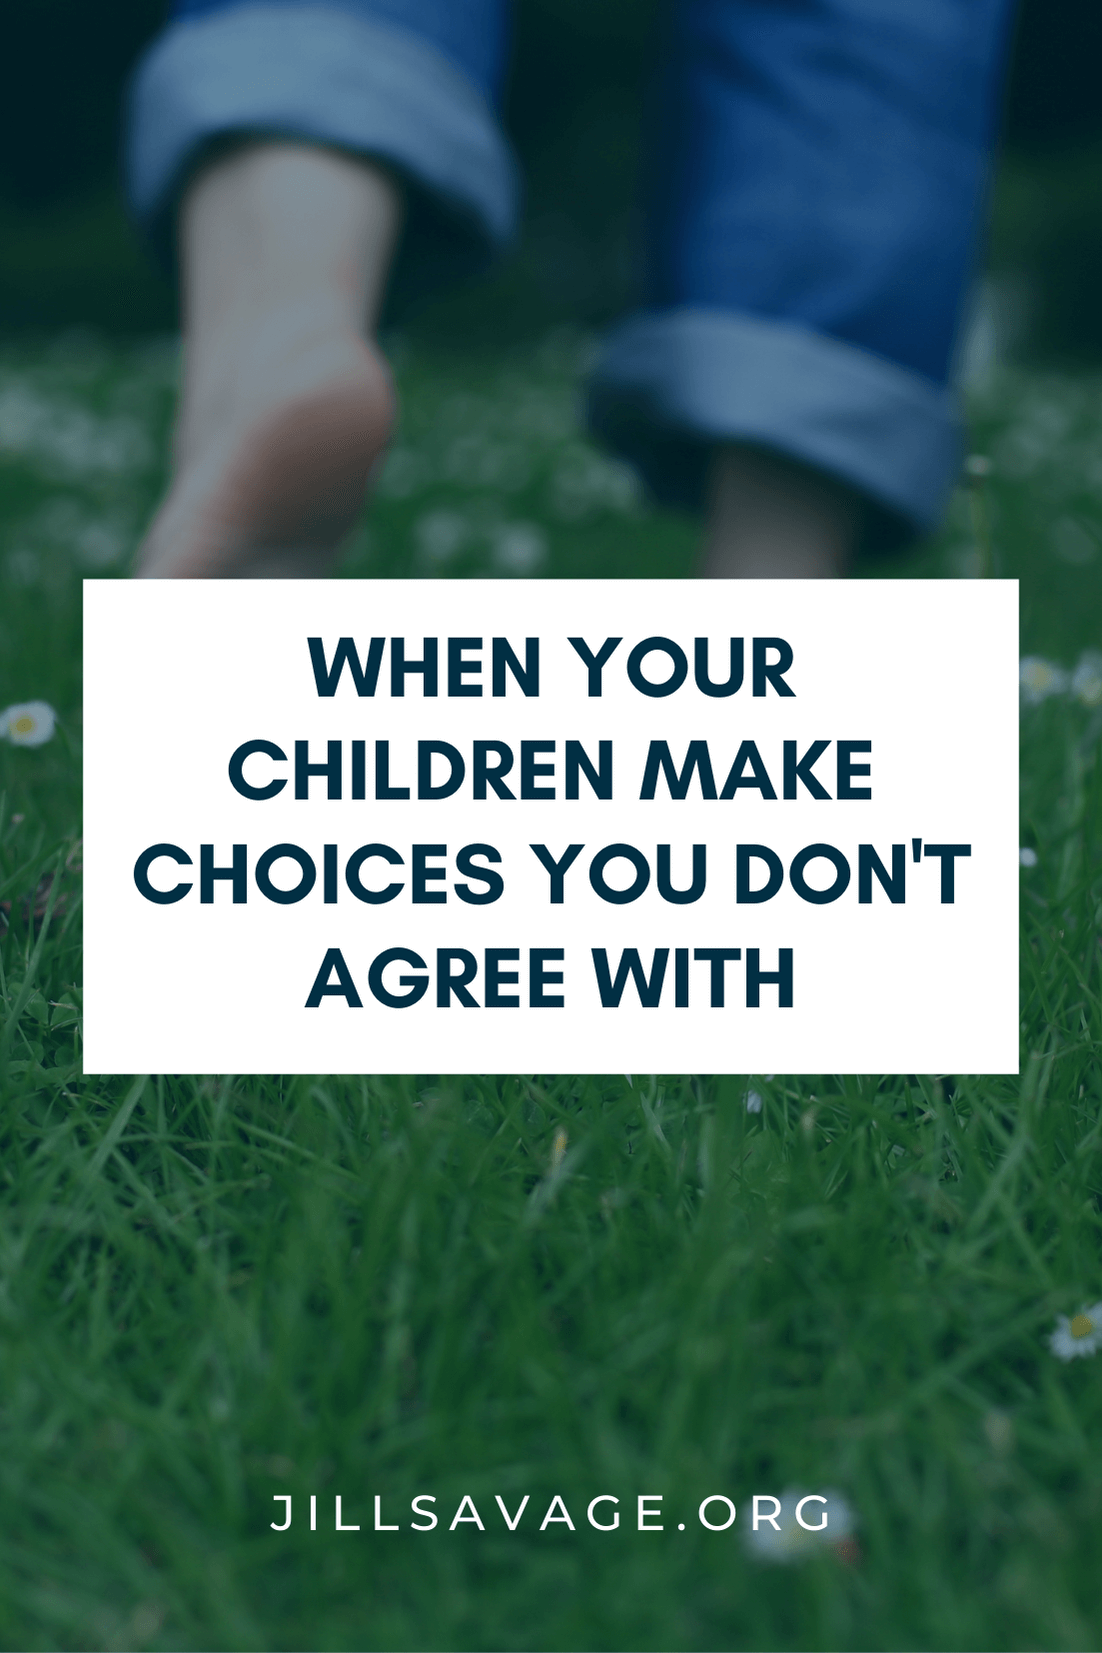 When Your Children Make Choices You Don’t Agree With